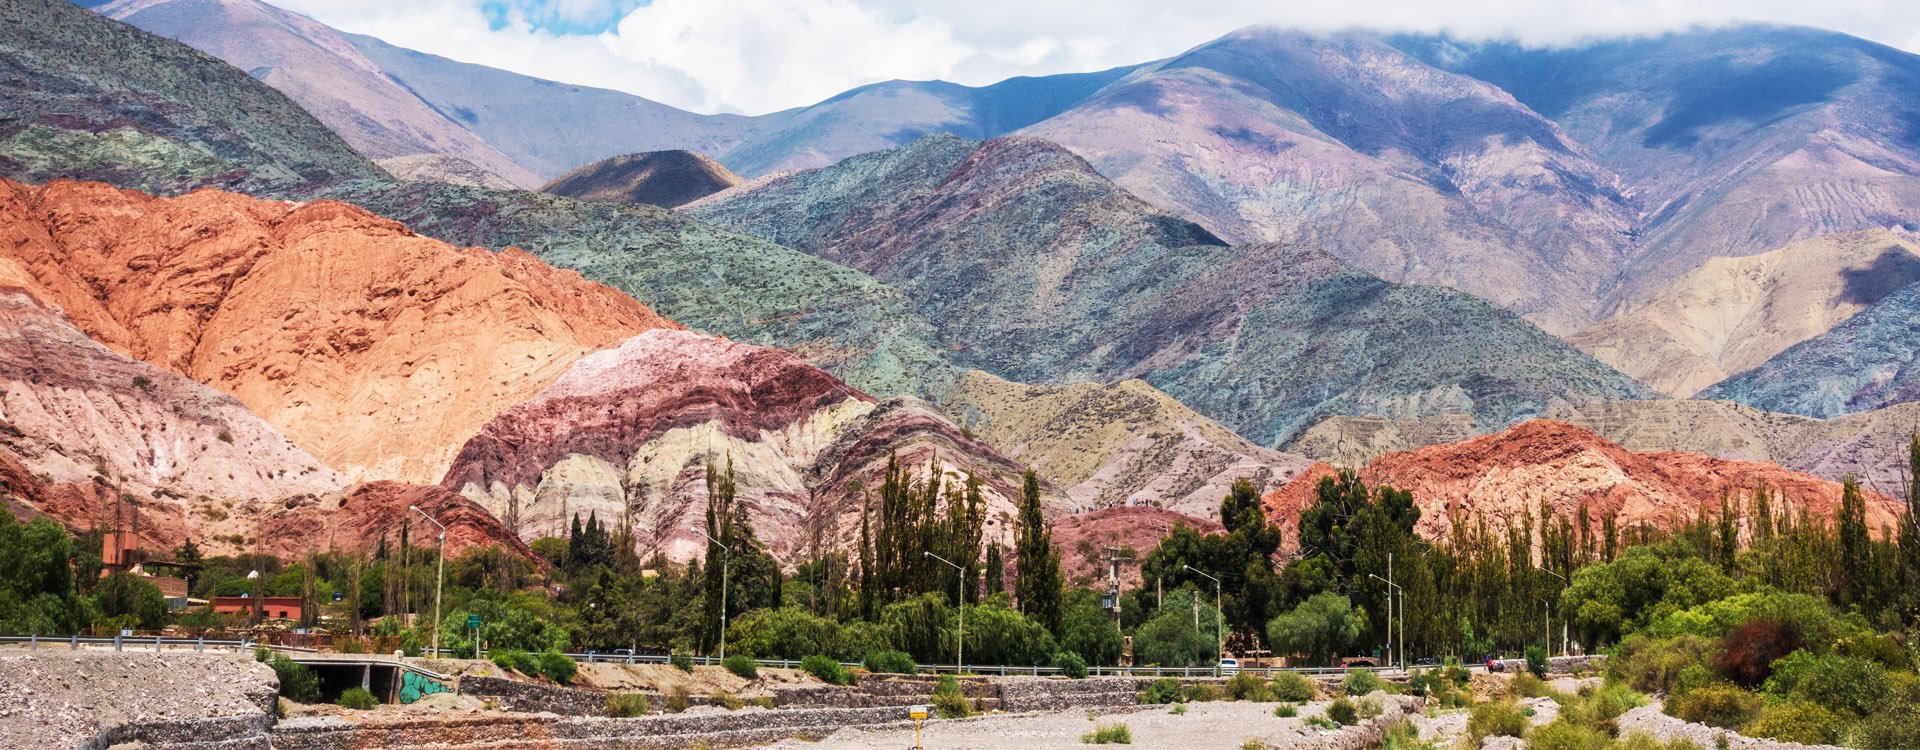 Purmamarca, region of Jujuy in the Nortwest of Argentina